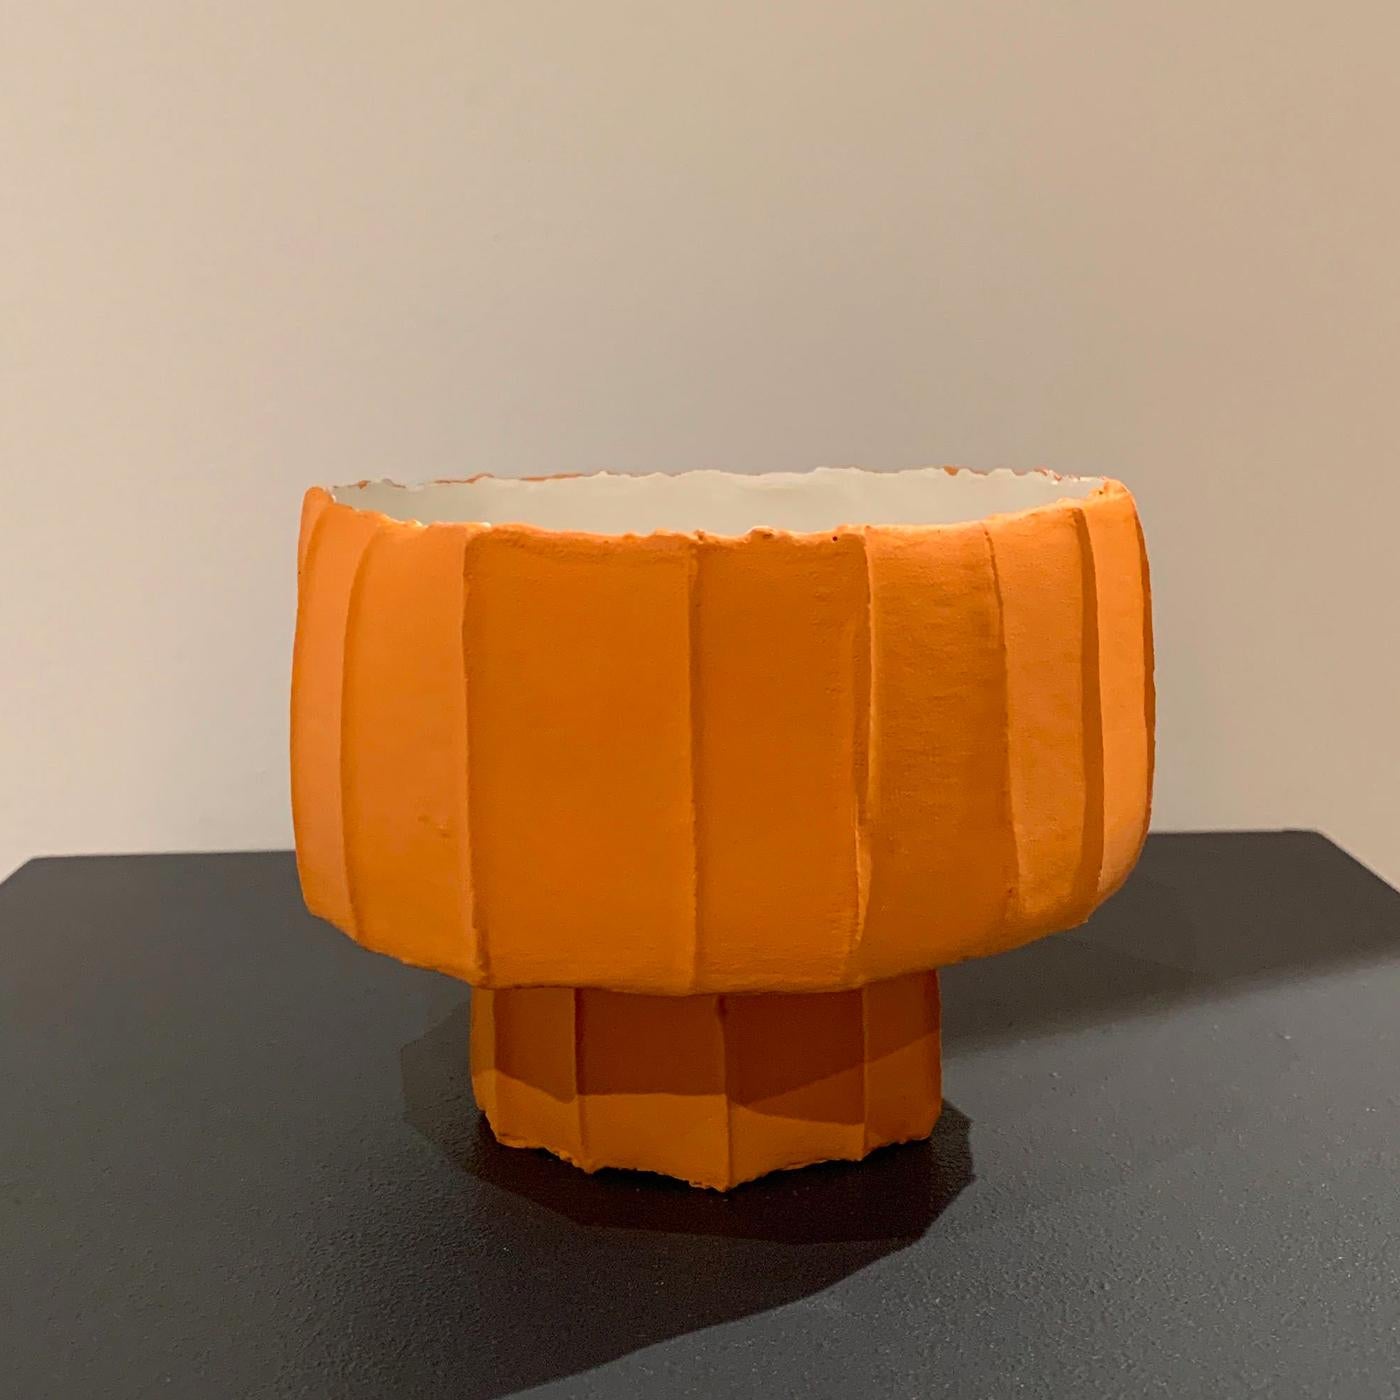 Marked by a vibrant light orange color, this vase has a distinctive silhouette that defies classical artistic norms: composed of two, inverted cylindrical tiers, the vase has a large tier stacked atop a small, narrow base. The vase is handmade using